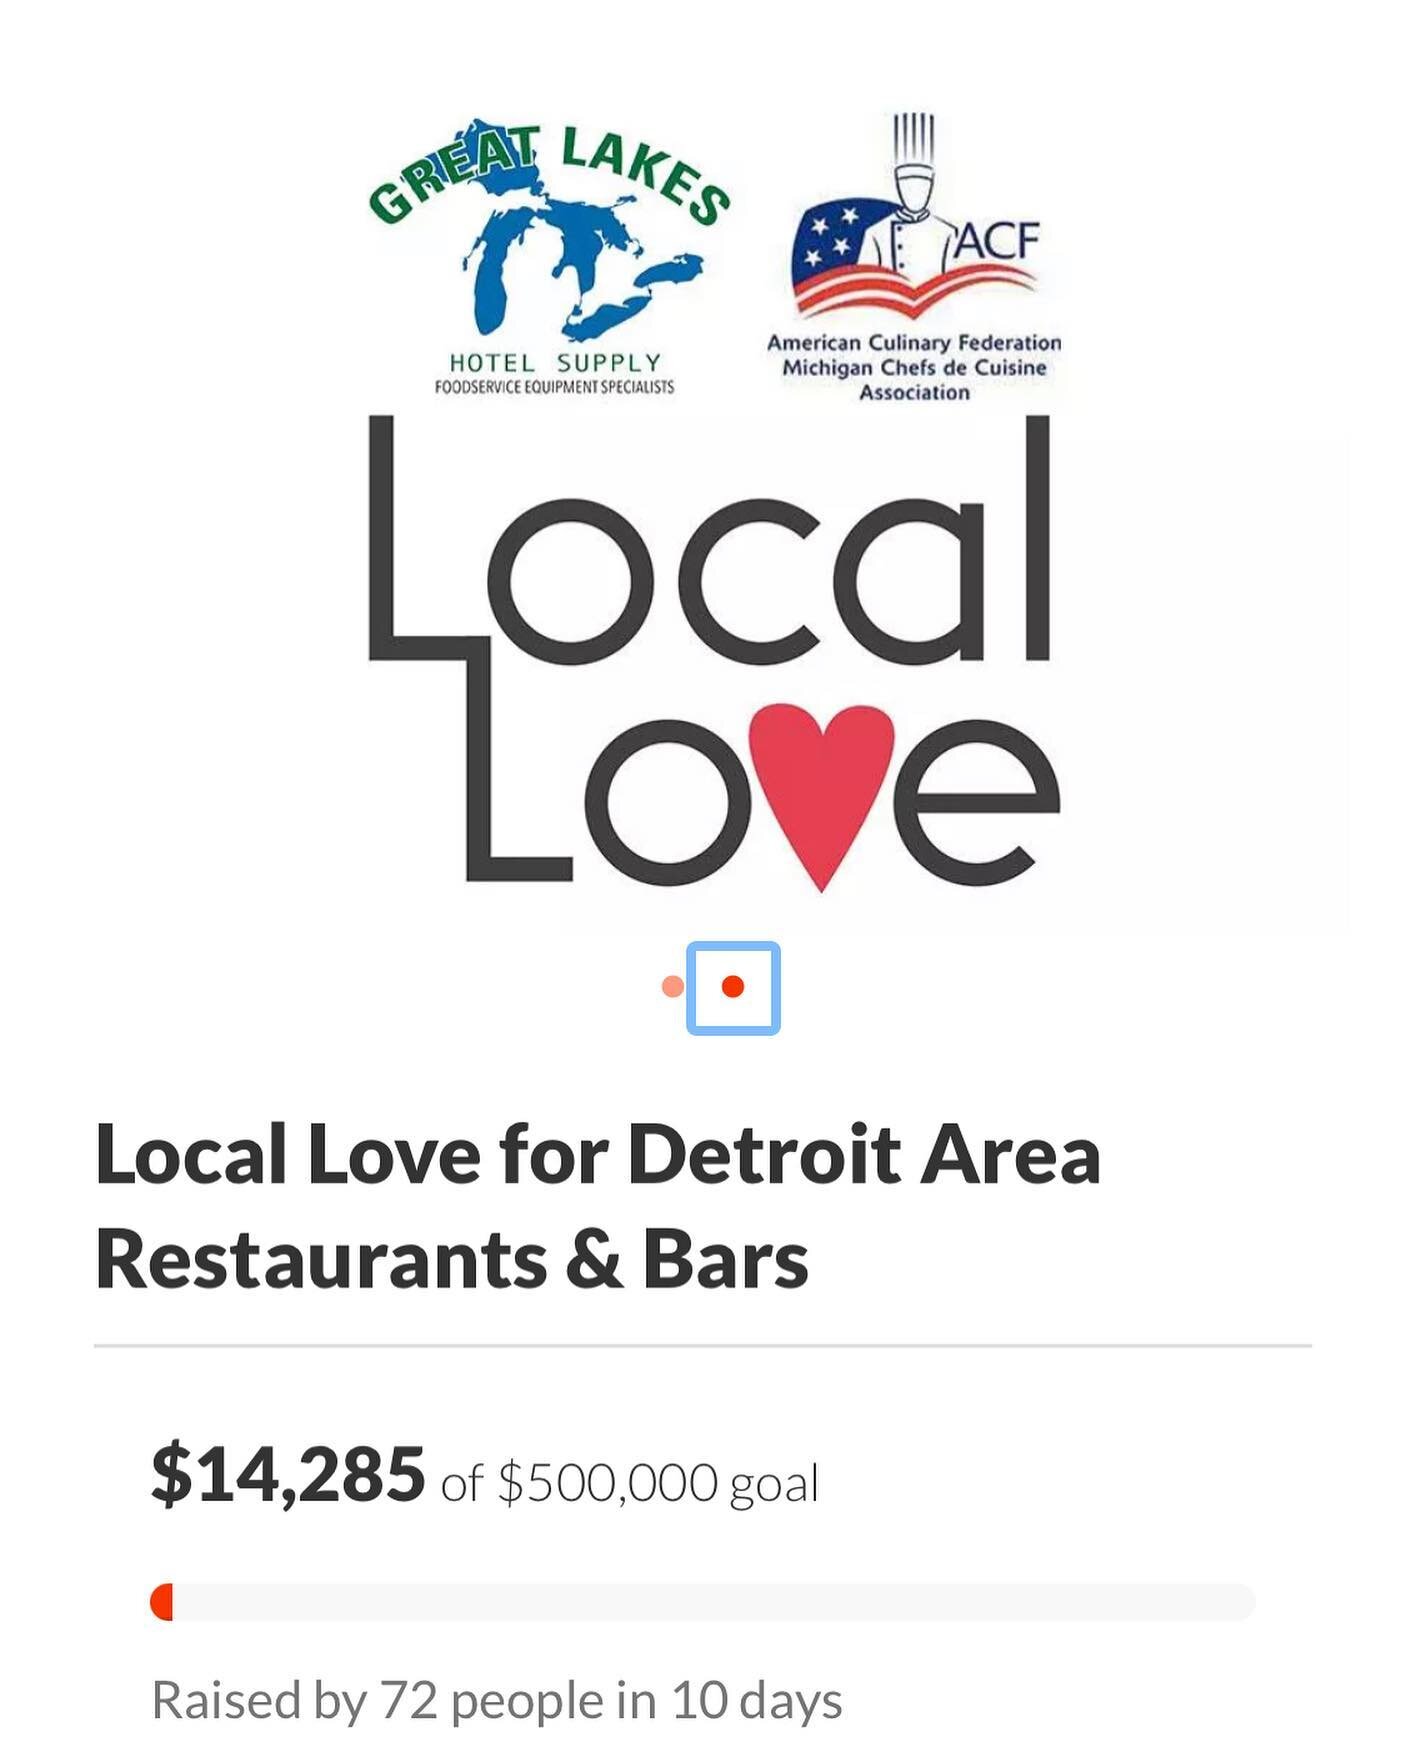 If you're able: please chip in whatever you might have to help support Detroit-area foodservice industry workers, many of whom have been impacted by COVID-19 in an outsized way, get through this crisis. 

Great Lakes Hotel Supply is partnering with t